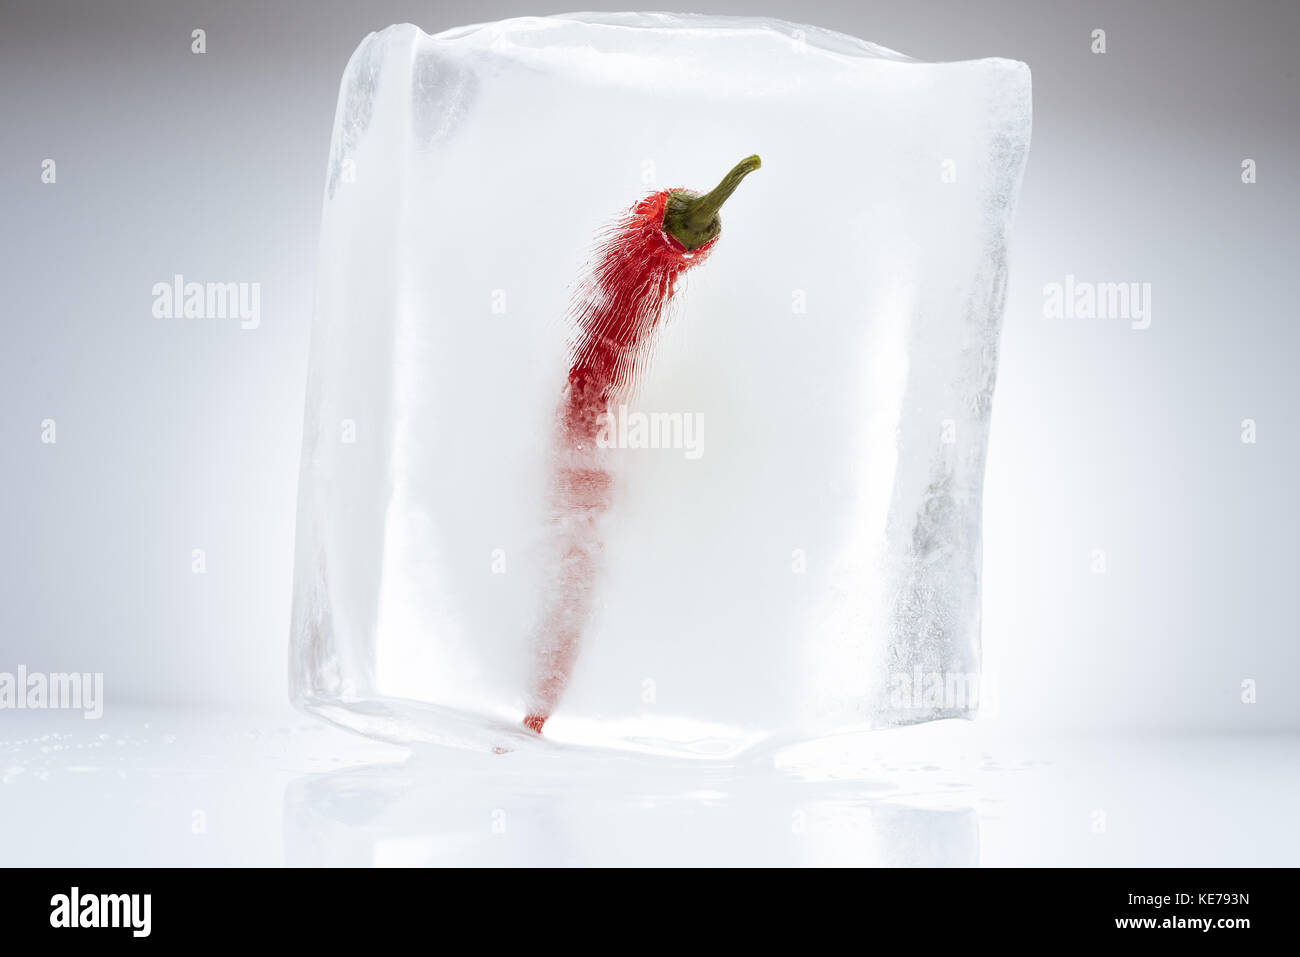 Chilly Peppers Ice Cubes